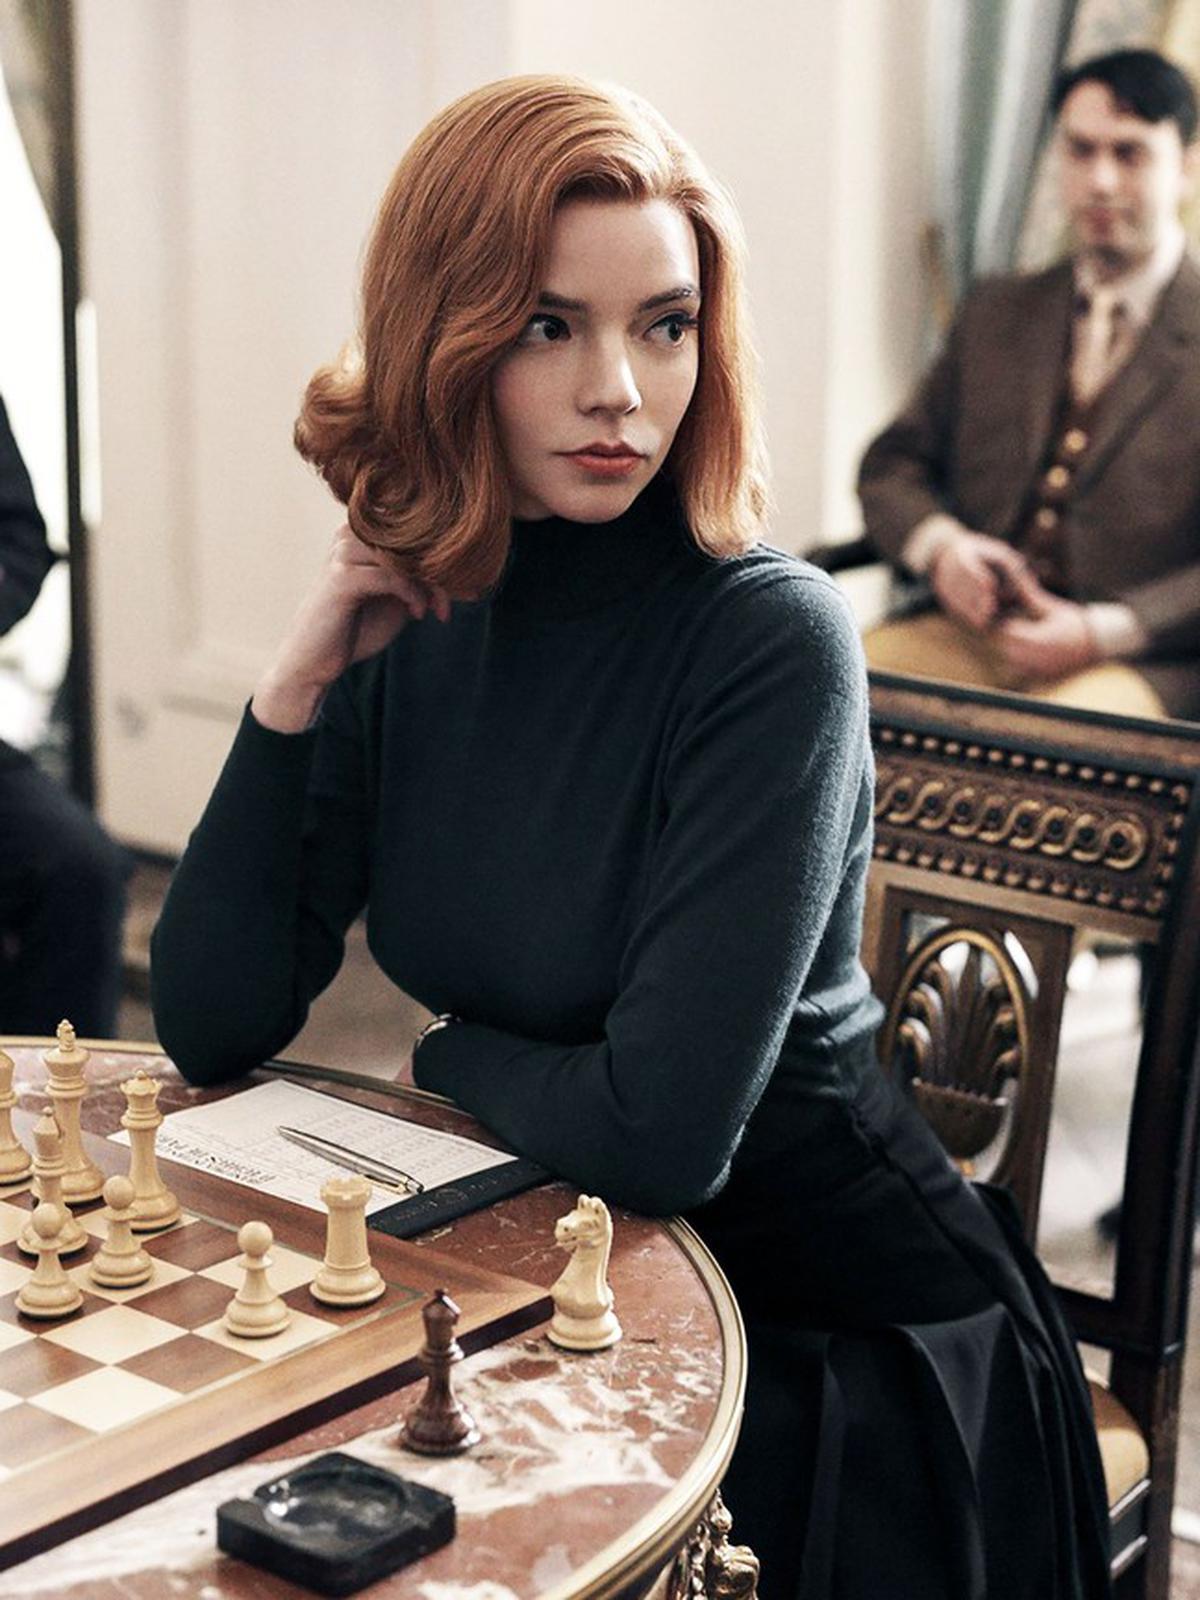 Anya Taylor-Joy as Beth Harmon, a gifted young chess player, in Netflix miniseries ‘The Queen’s Gambit’. 